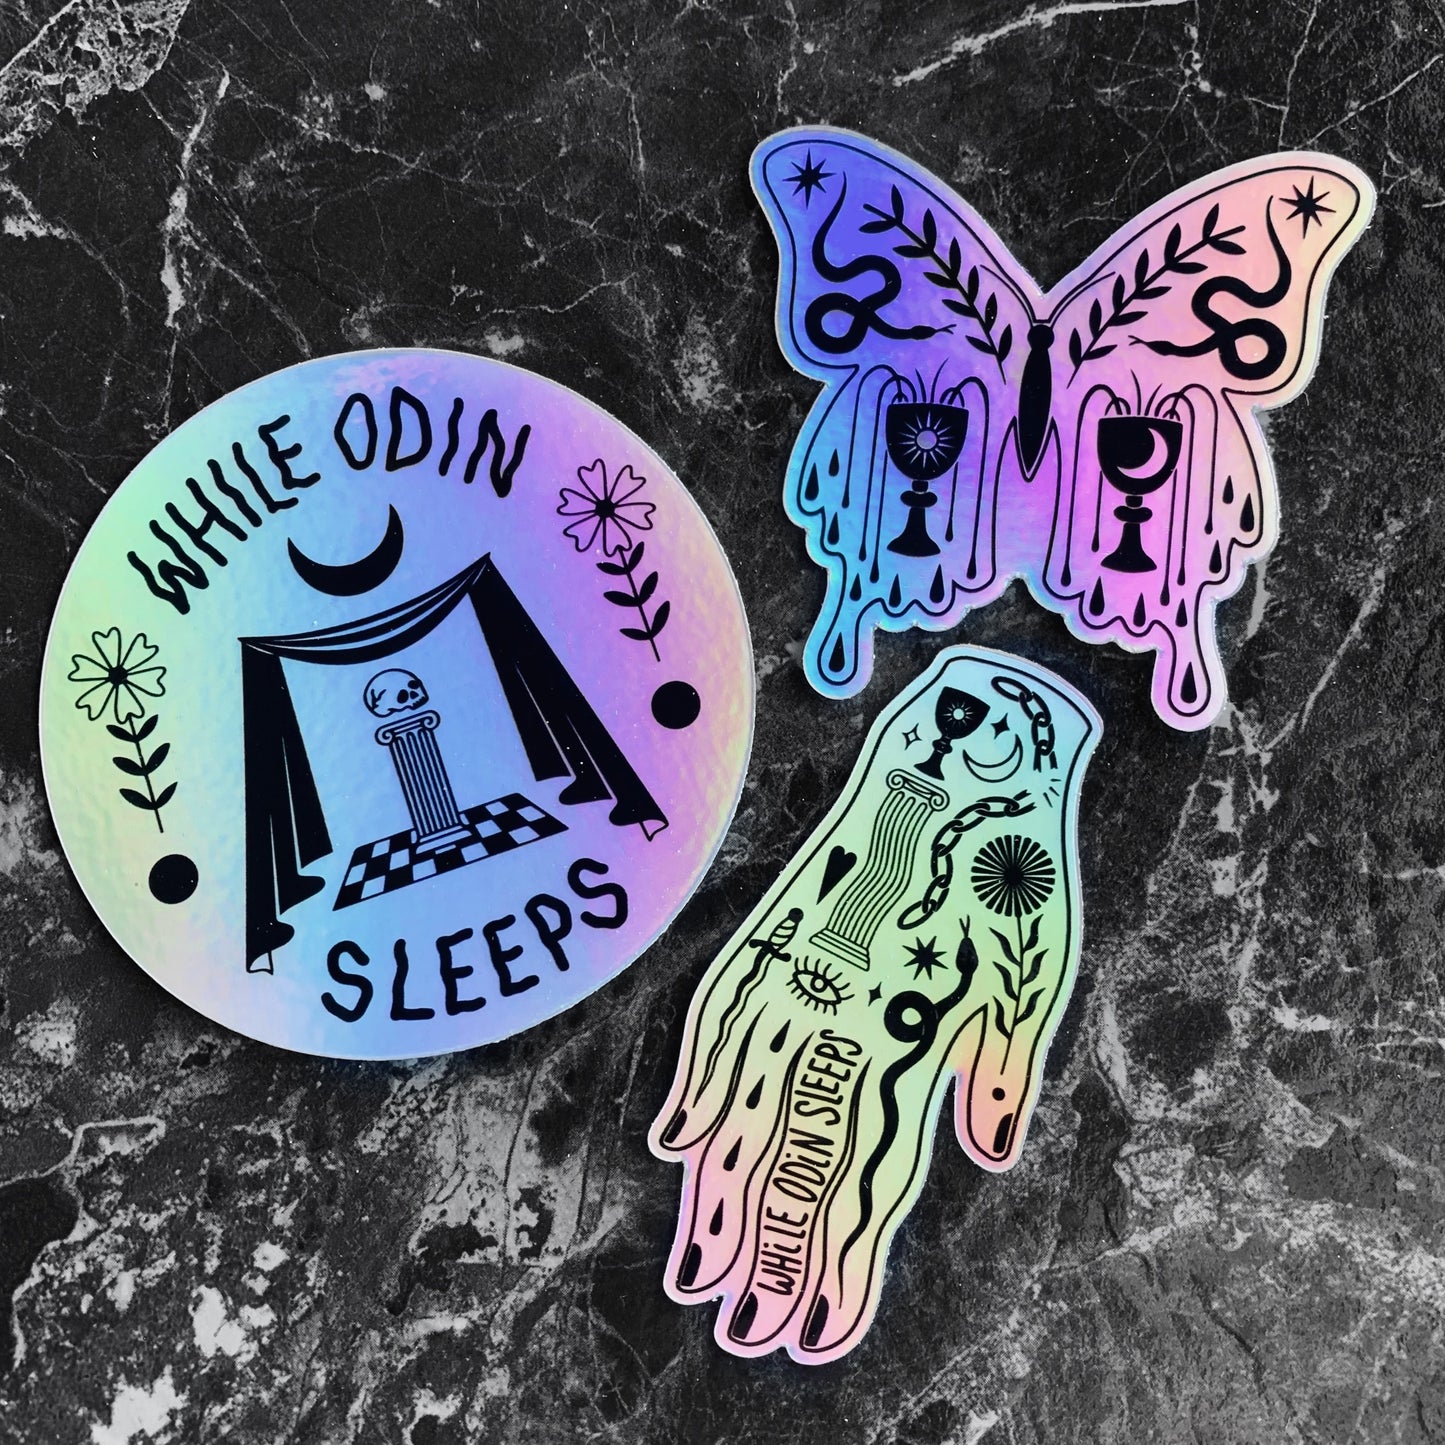 Mystery Sticker Pack! - While Odin Sleeps